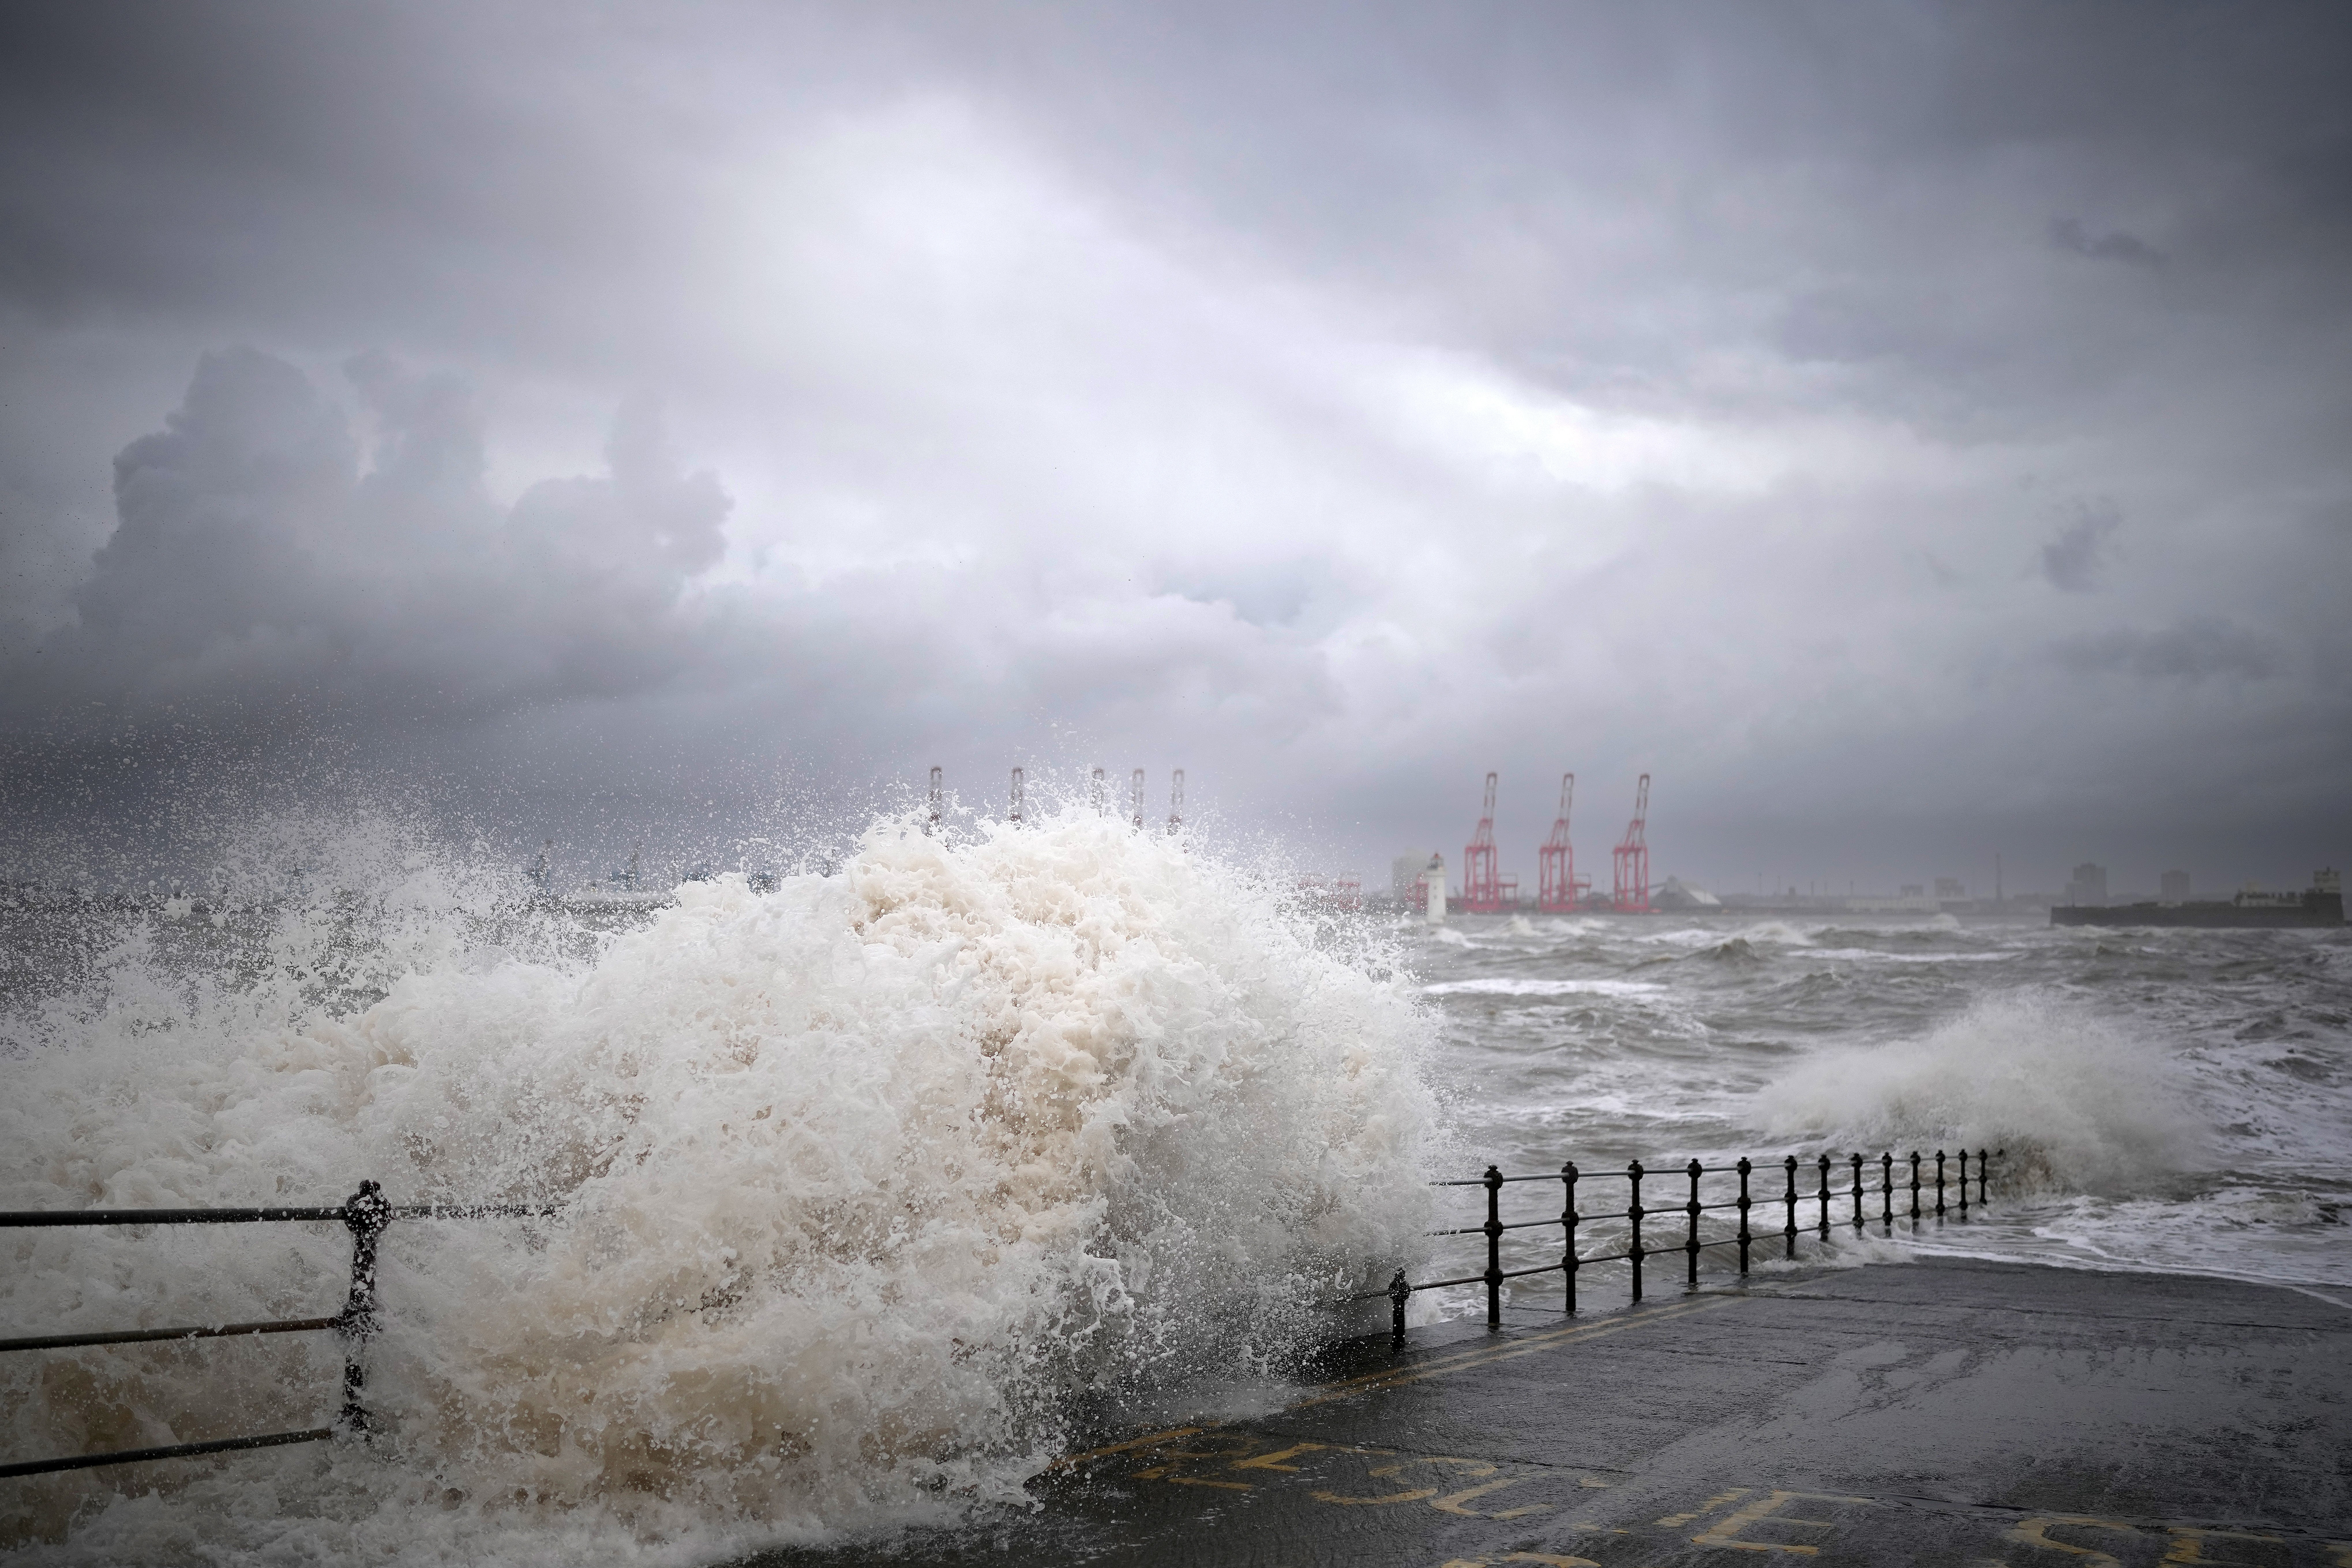 Waves created by high winds and Spring tides hit the sea wall at New Brighton promenade in Liverpool